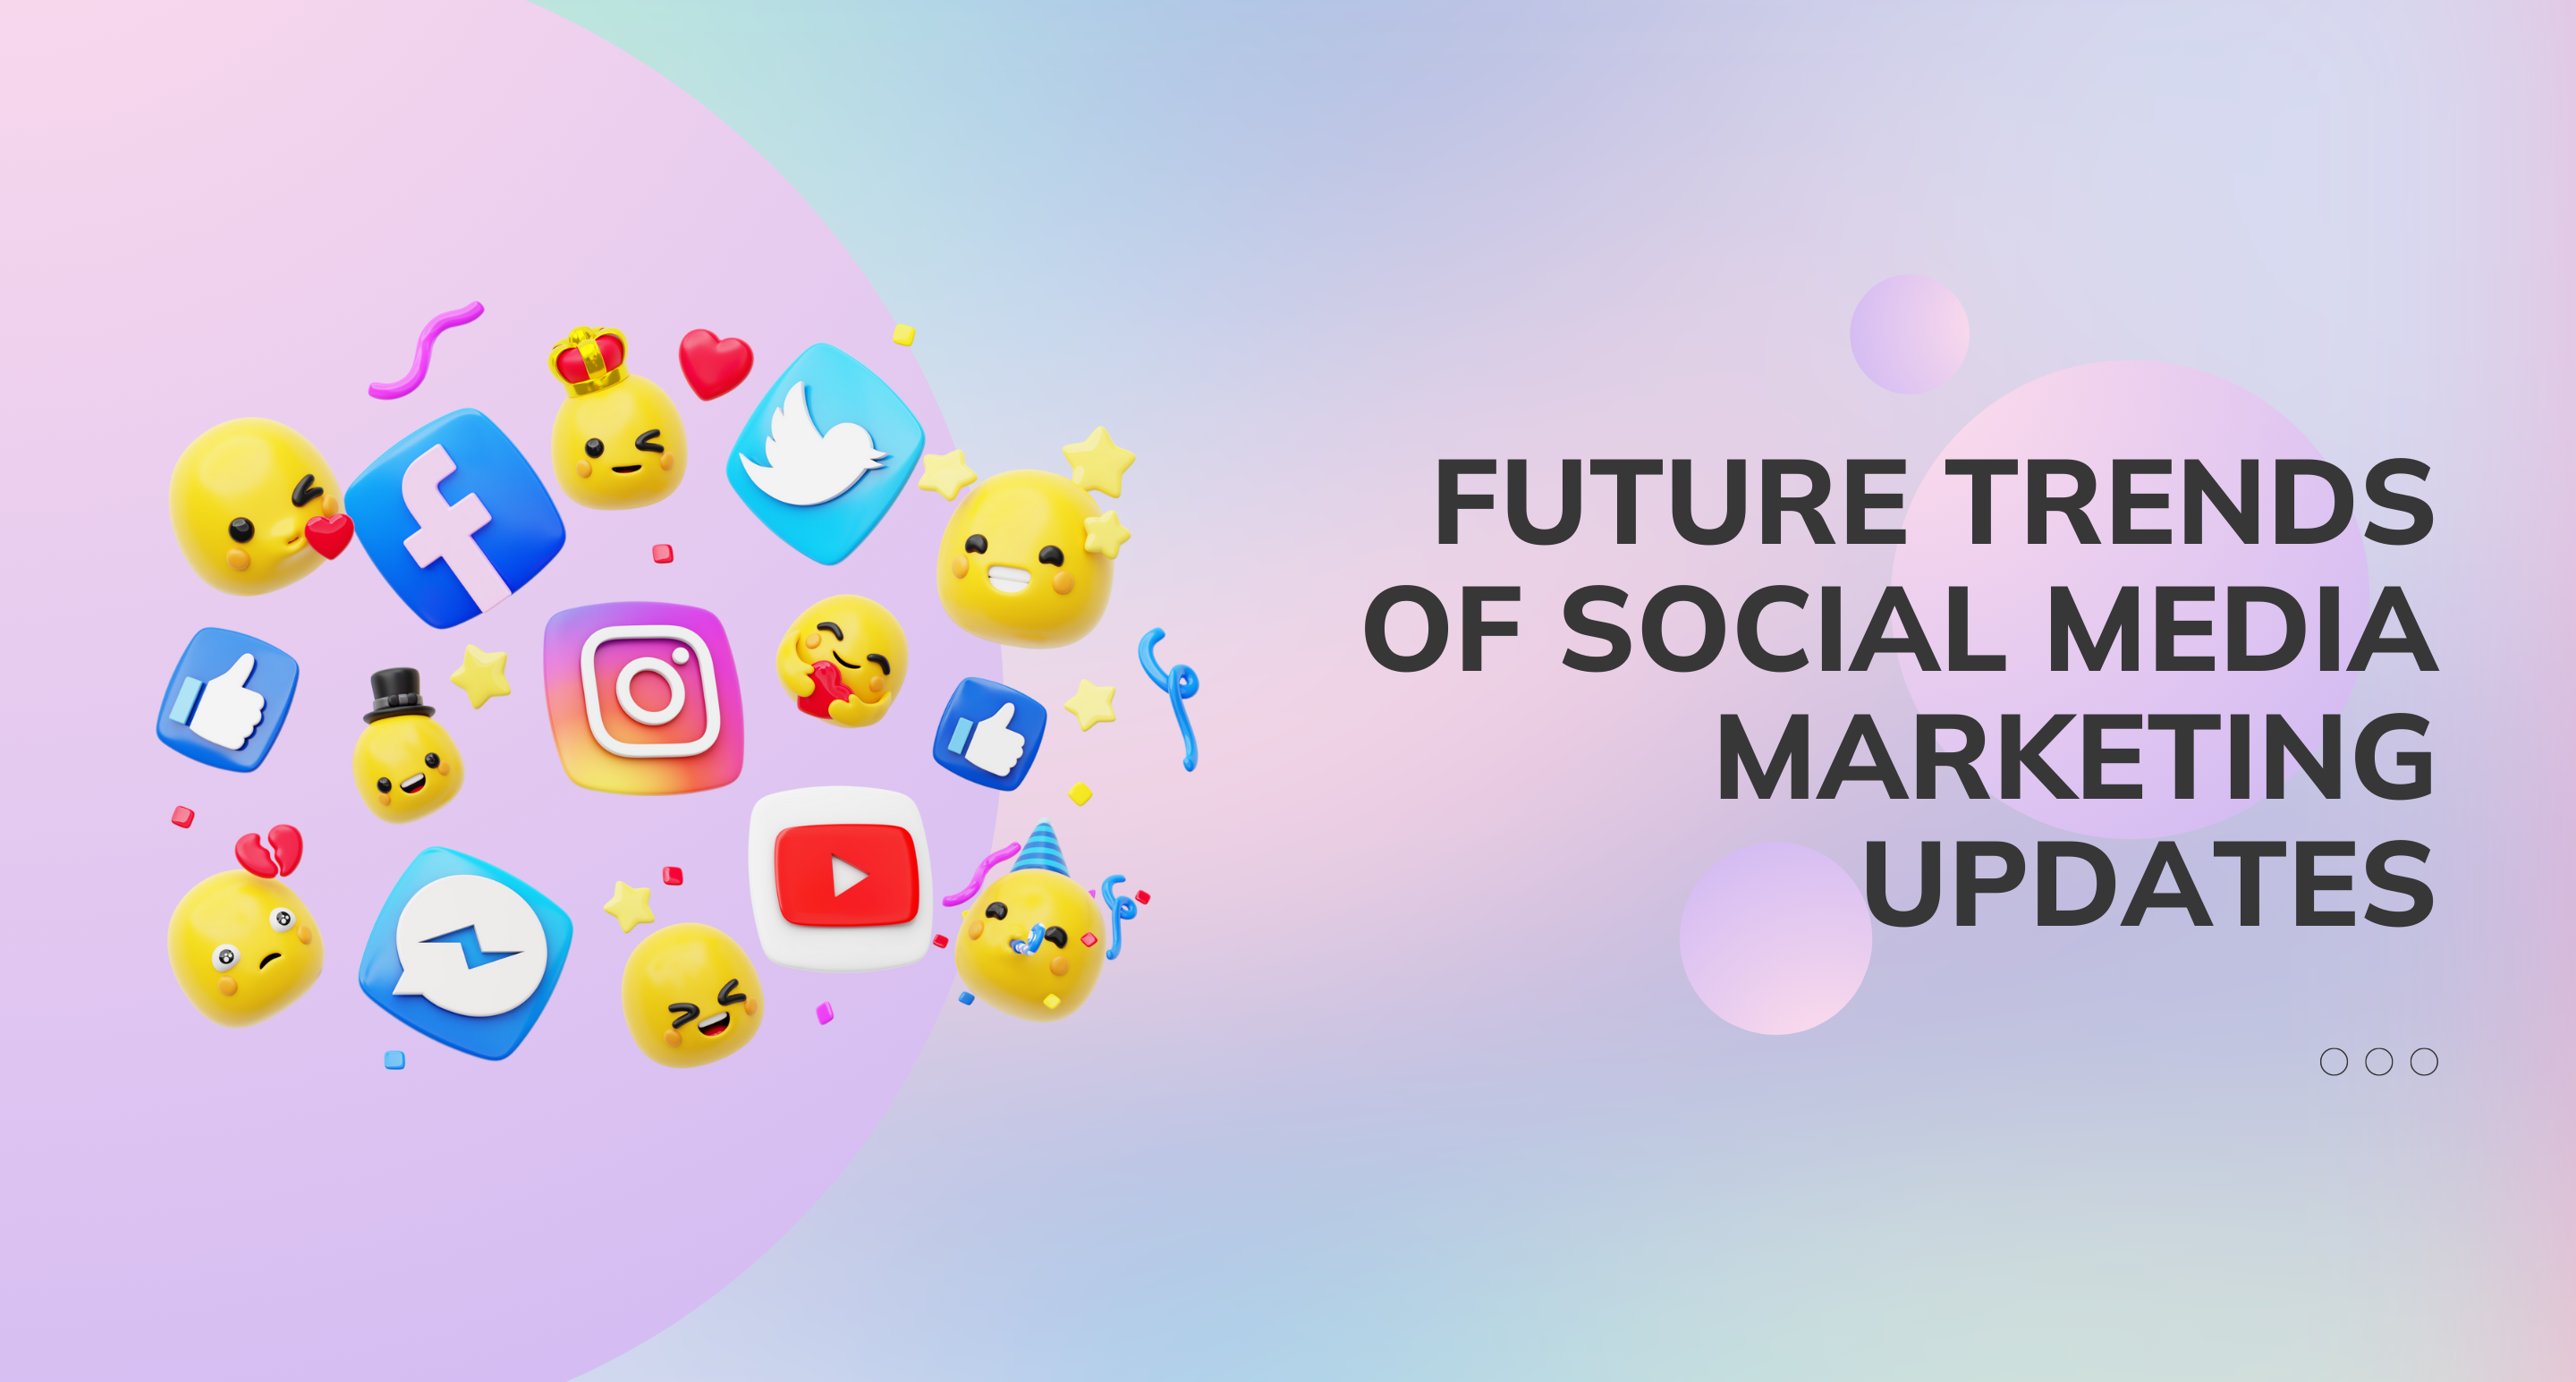 Social Media Marketing Updates - Know the Future Trends